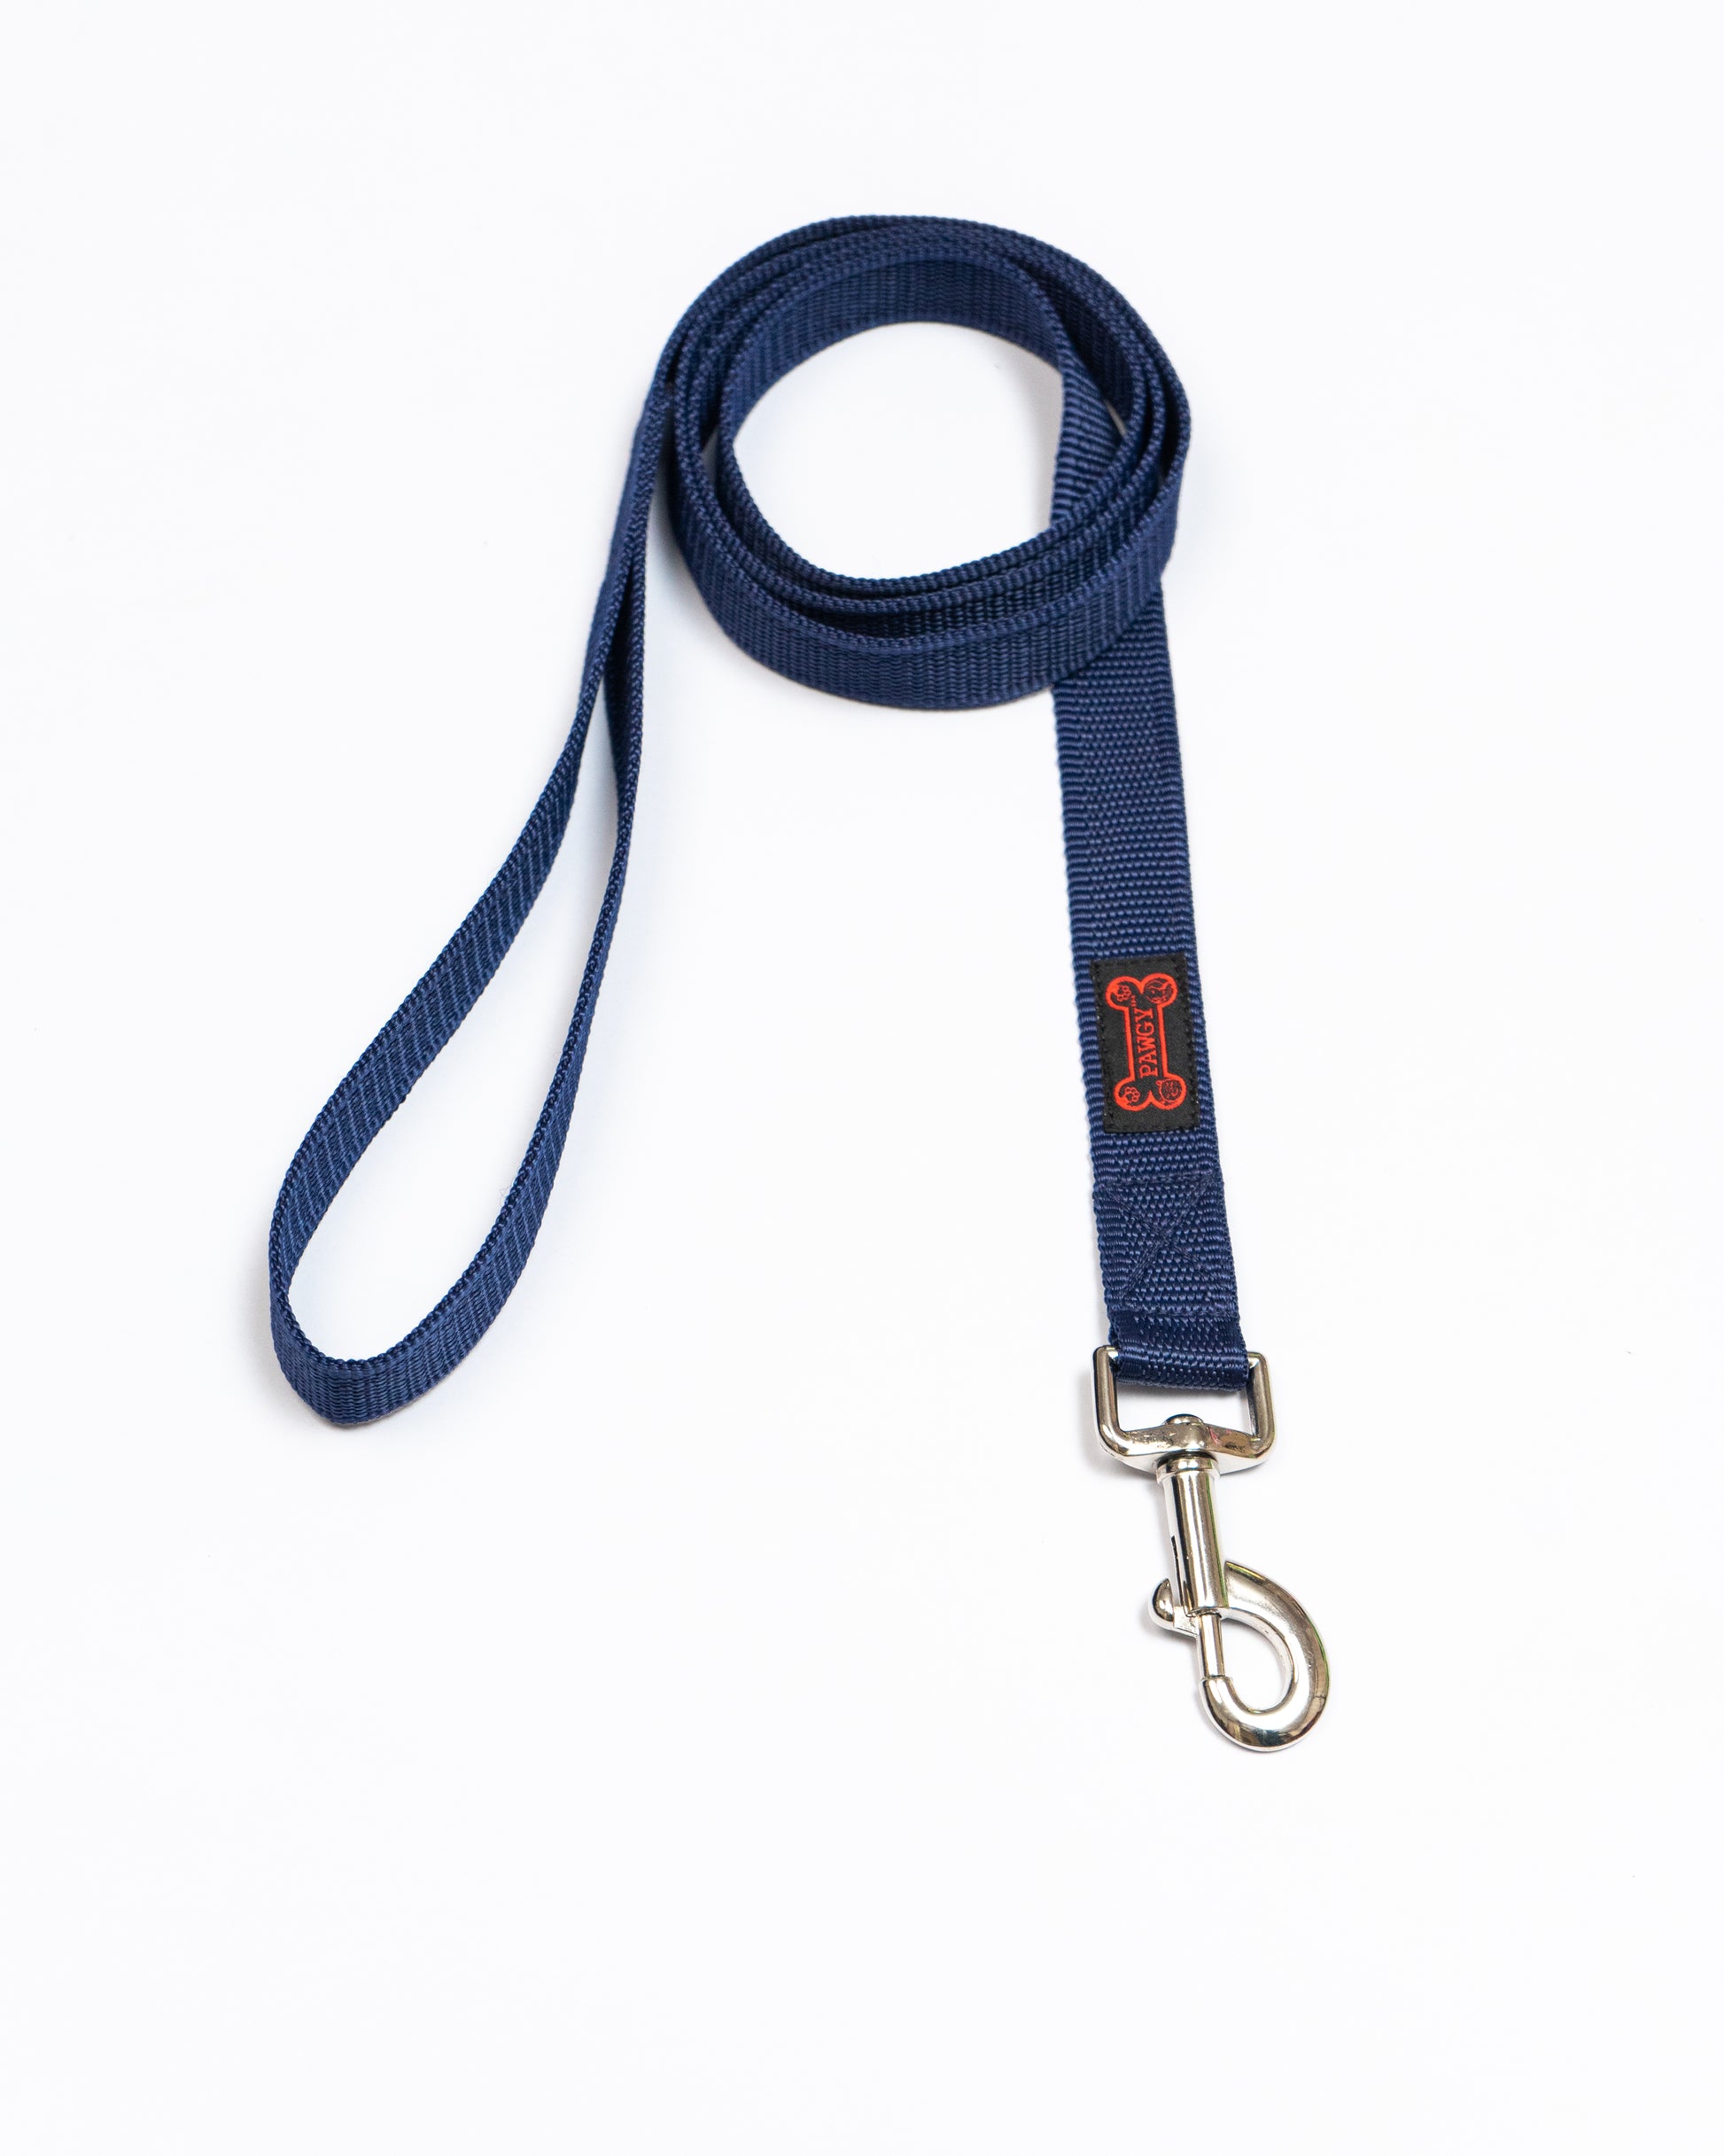 Pawgy Pets Daily-use Leash: Navy Blue for Dogs & Cats